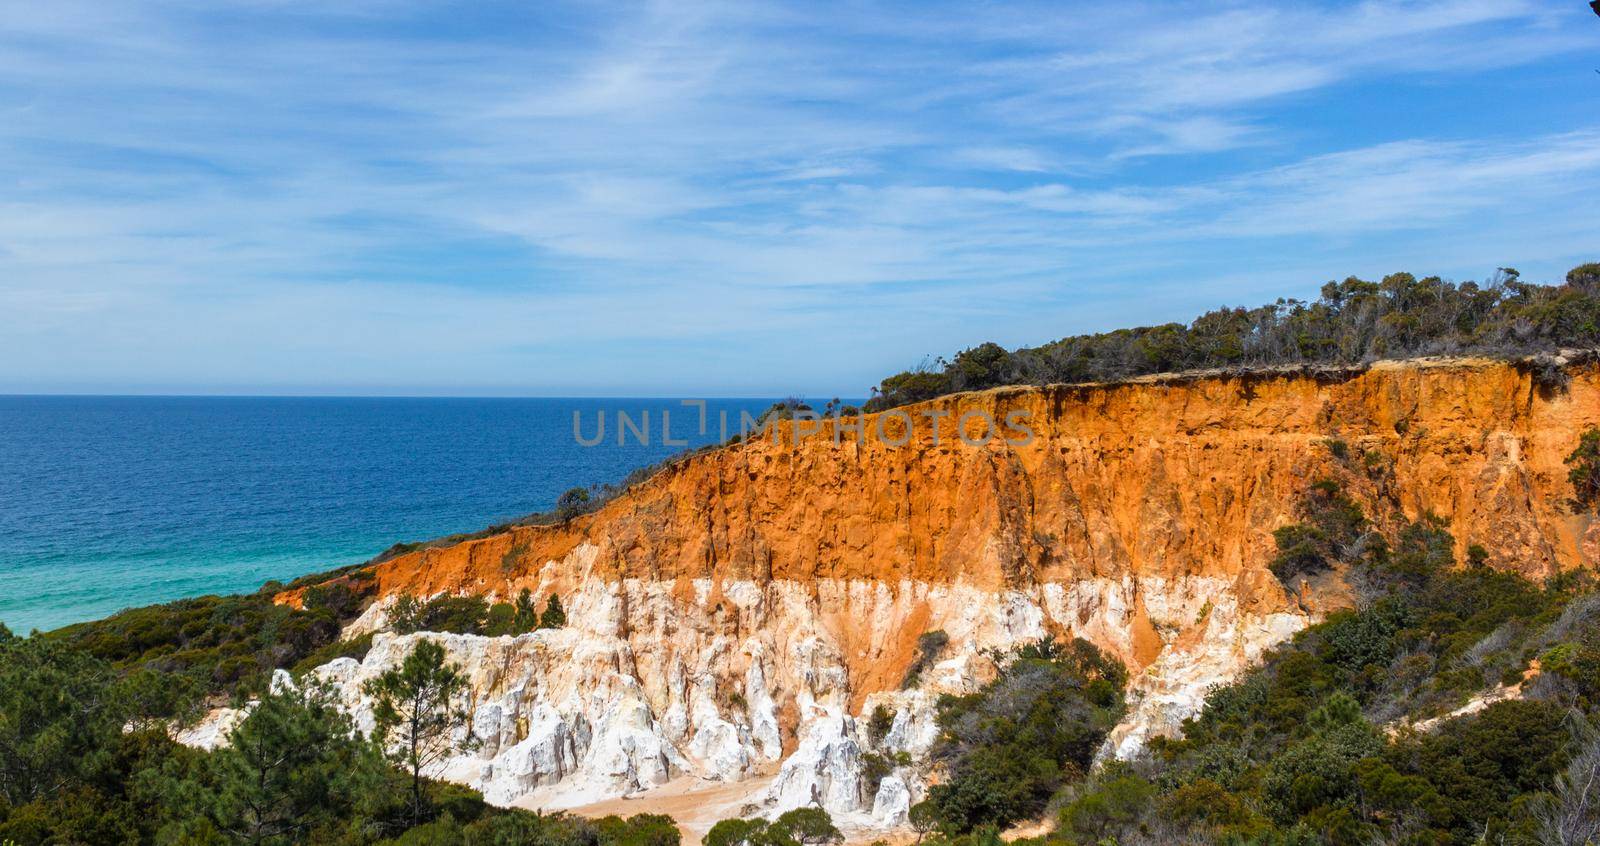 Pinnacles and Long Beach in the Sapphire Coast, NSW Australia by bettercallcurry